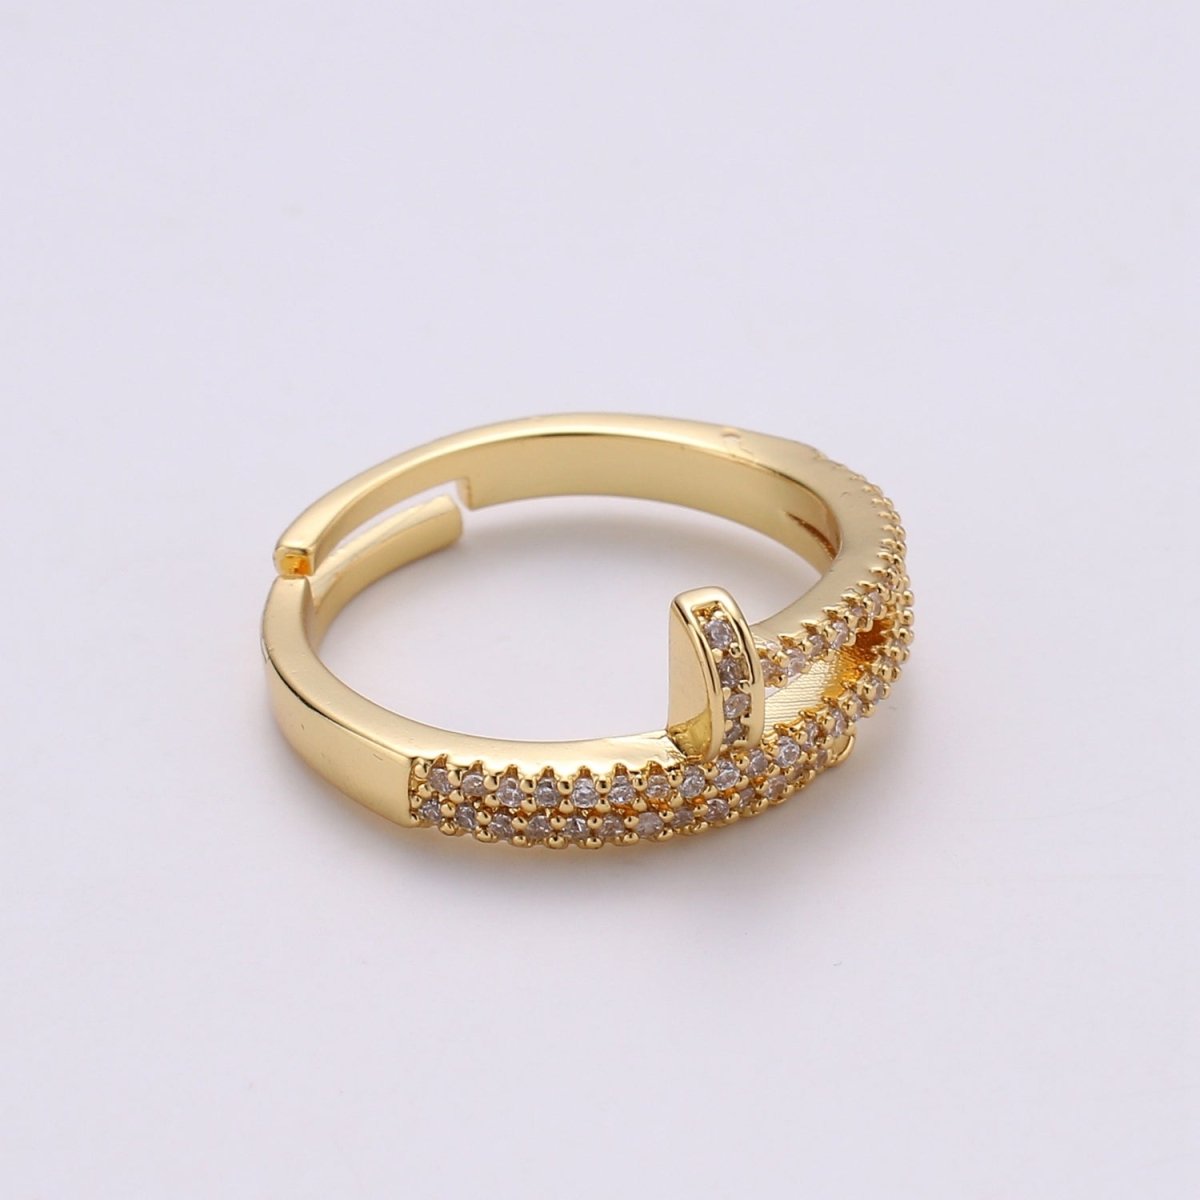 Dainty Spiral Ring Gold Adjustable Minimalist Modern Trending Stackable Streetwear Open Ring Accessory R-195 - DLUXCA